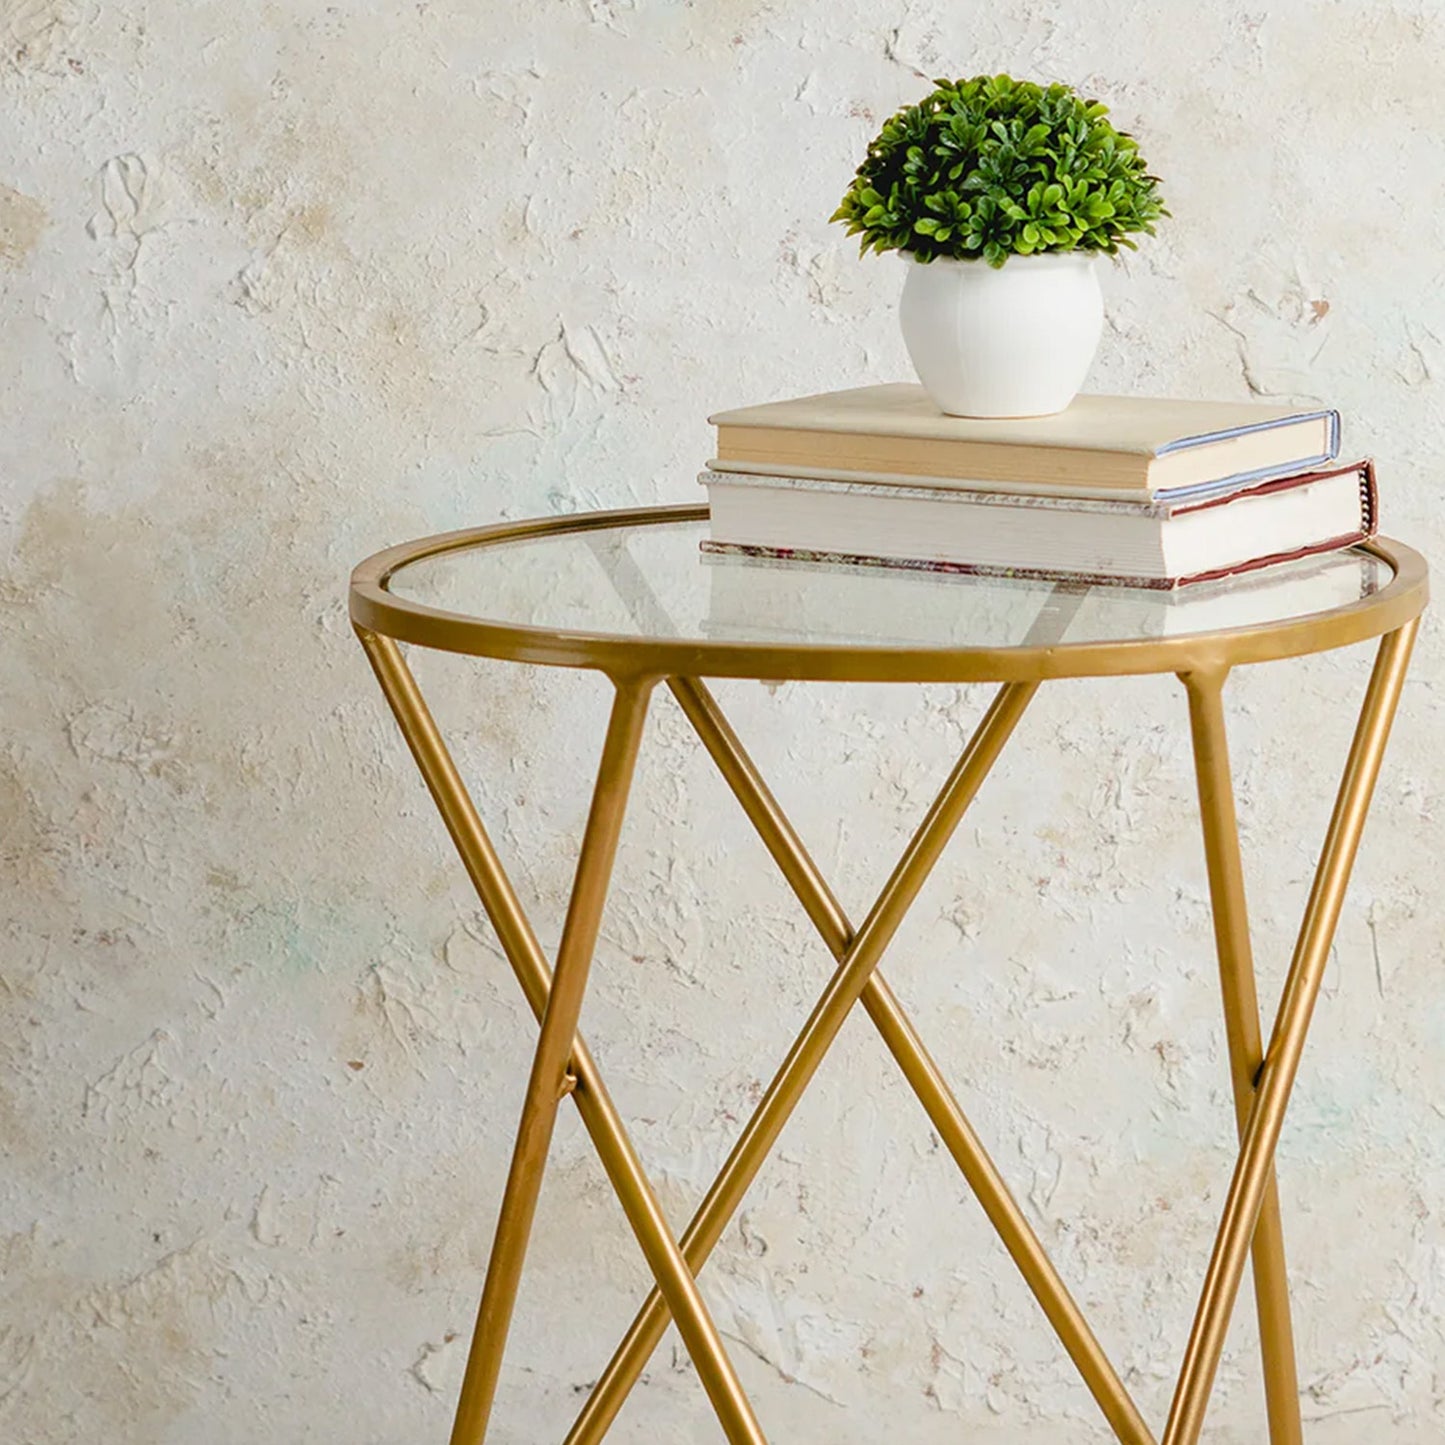 Contemporary Metallic Cross End Table in Gold Color